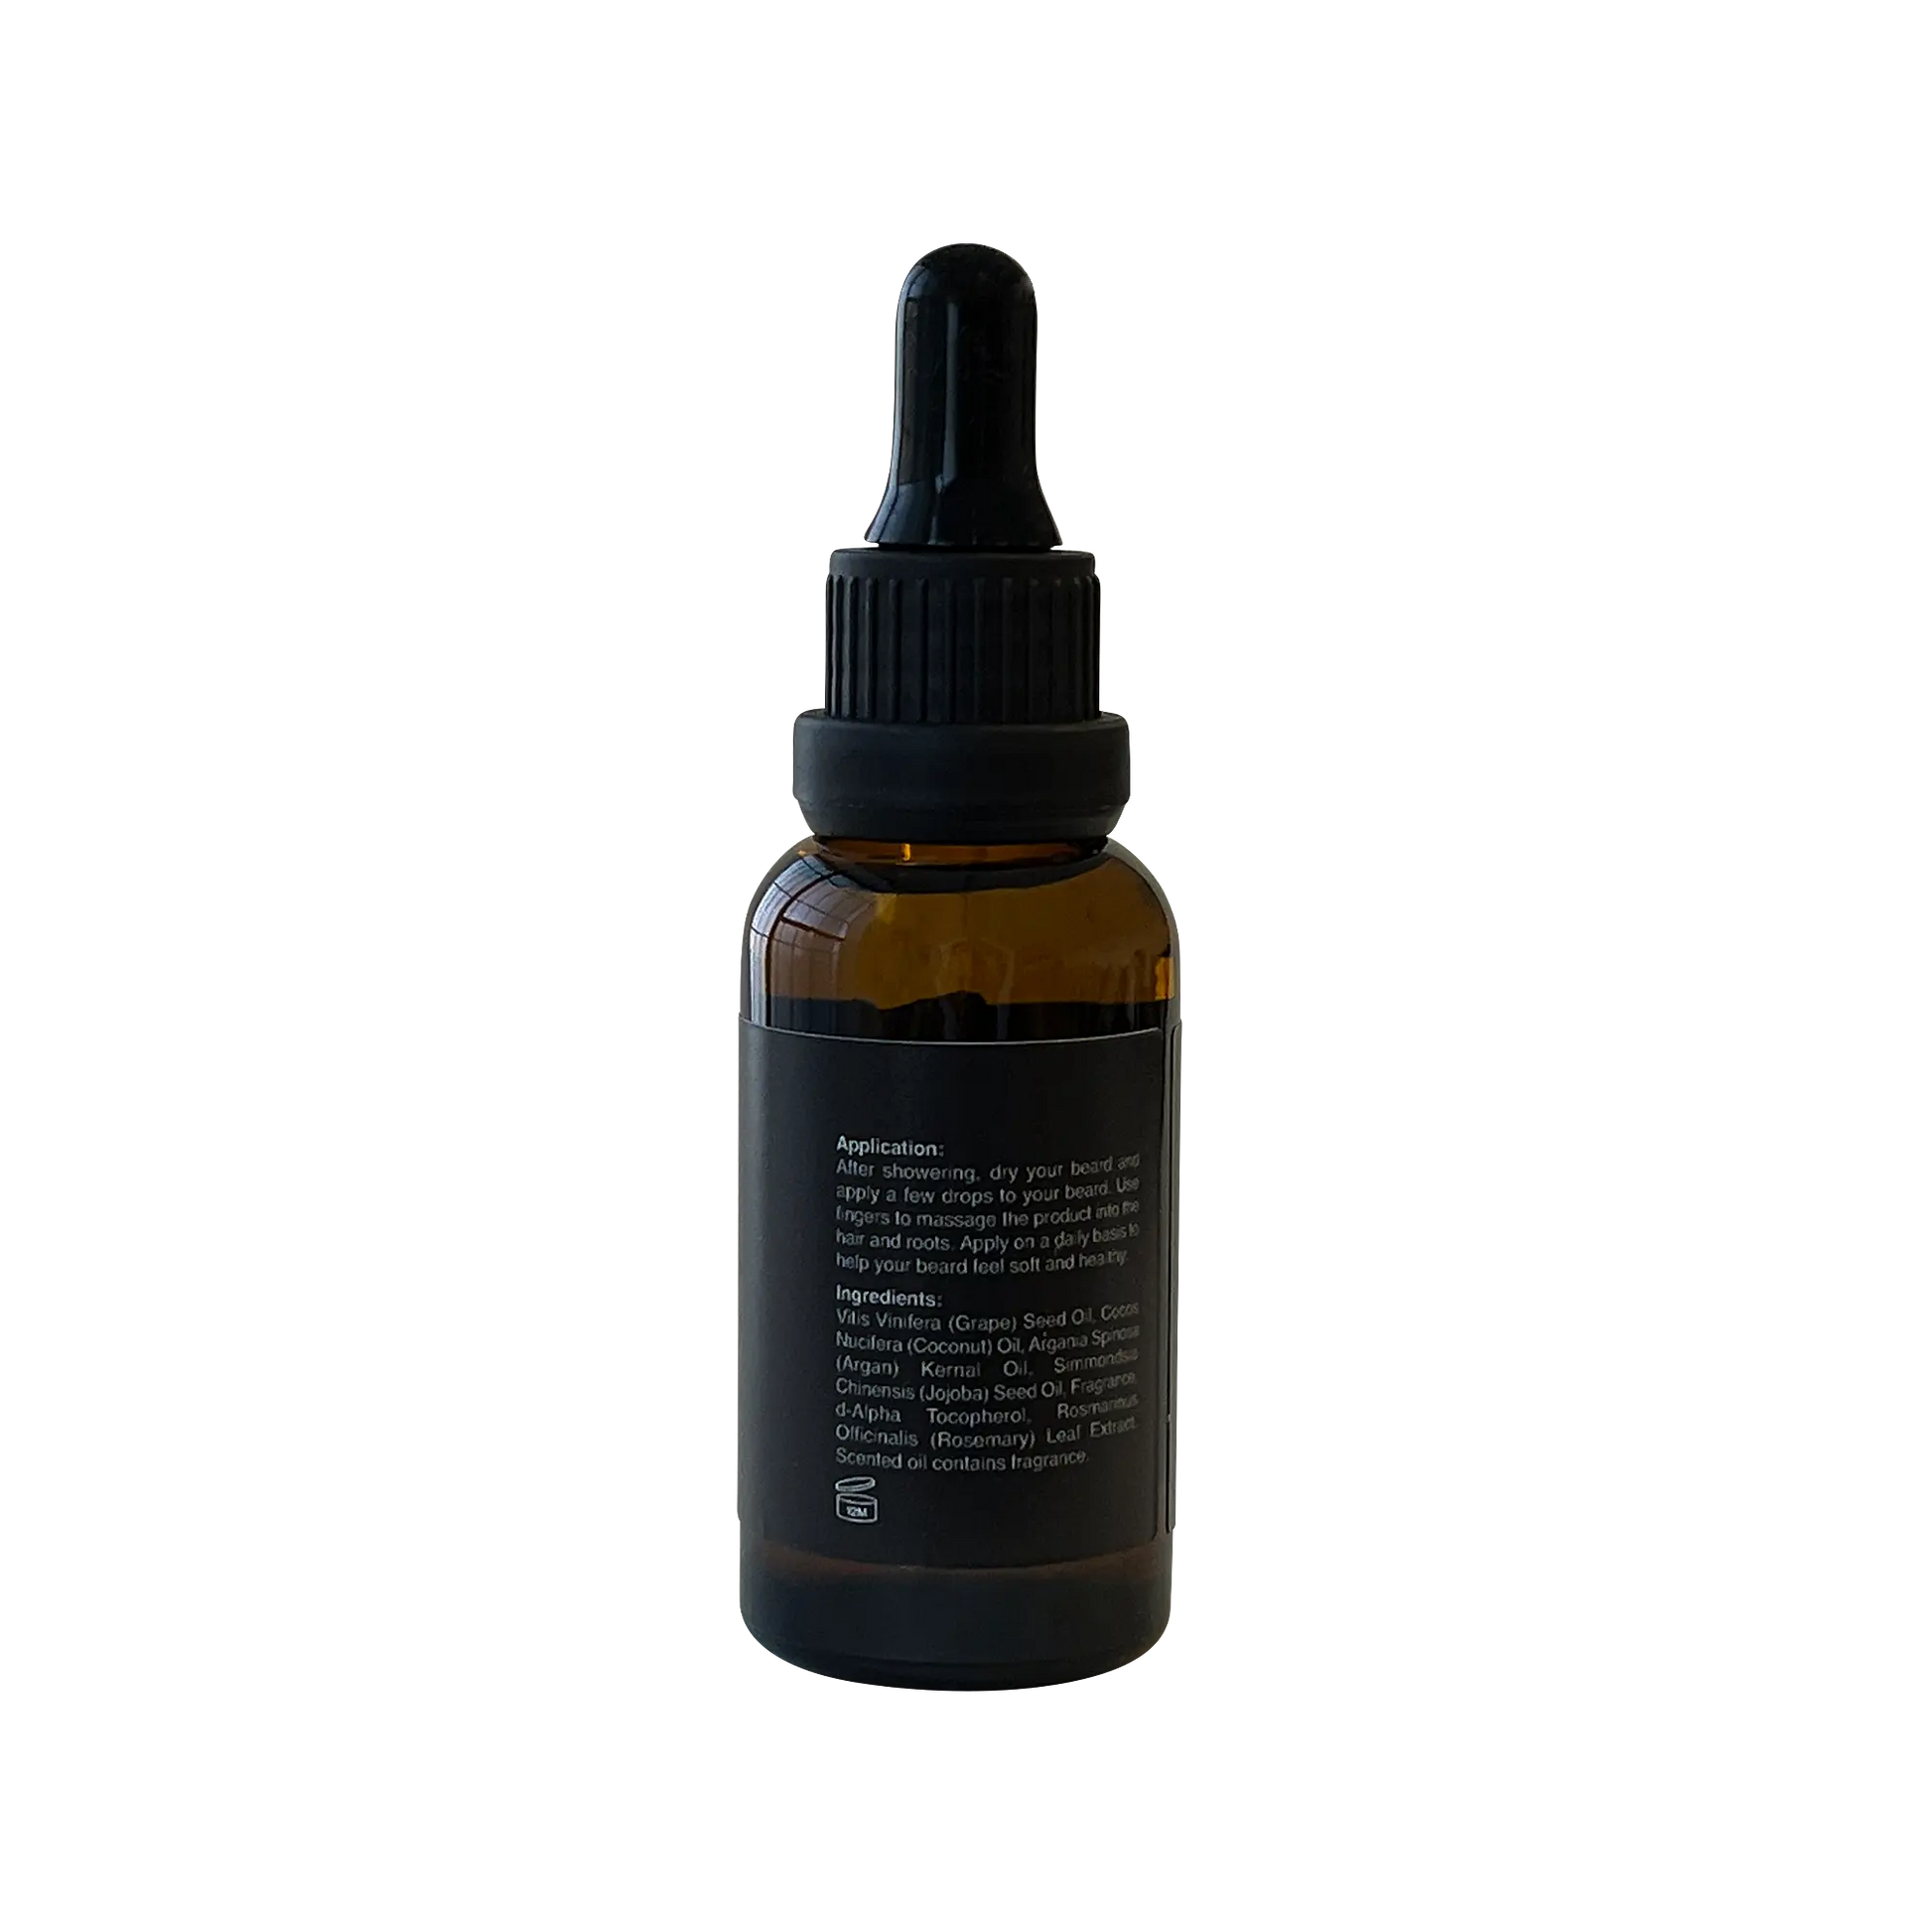 "Hydrate and refresh your beard with our Cruisin Organics Beard Growth Beard Oil. Made with grapeseed, argan, jojoba, and rosemary oils, it promotes growth and soothes irritation." All-natural